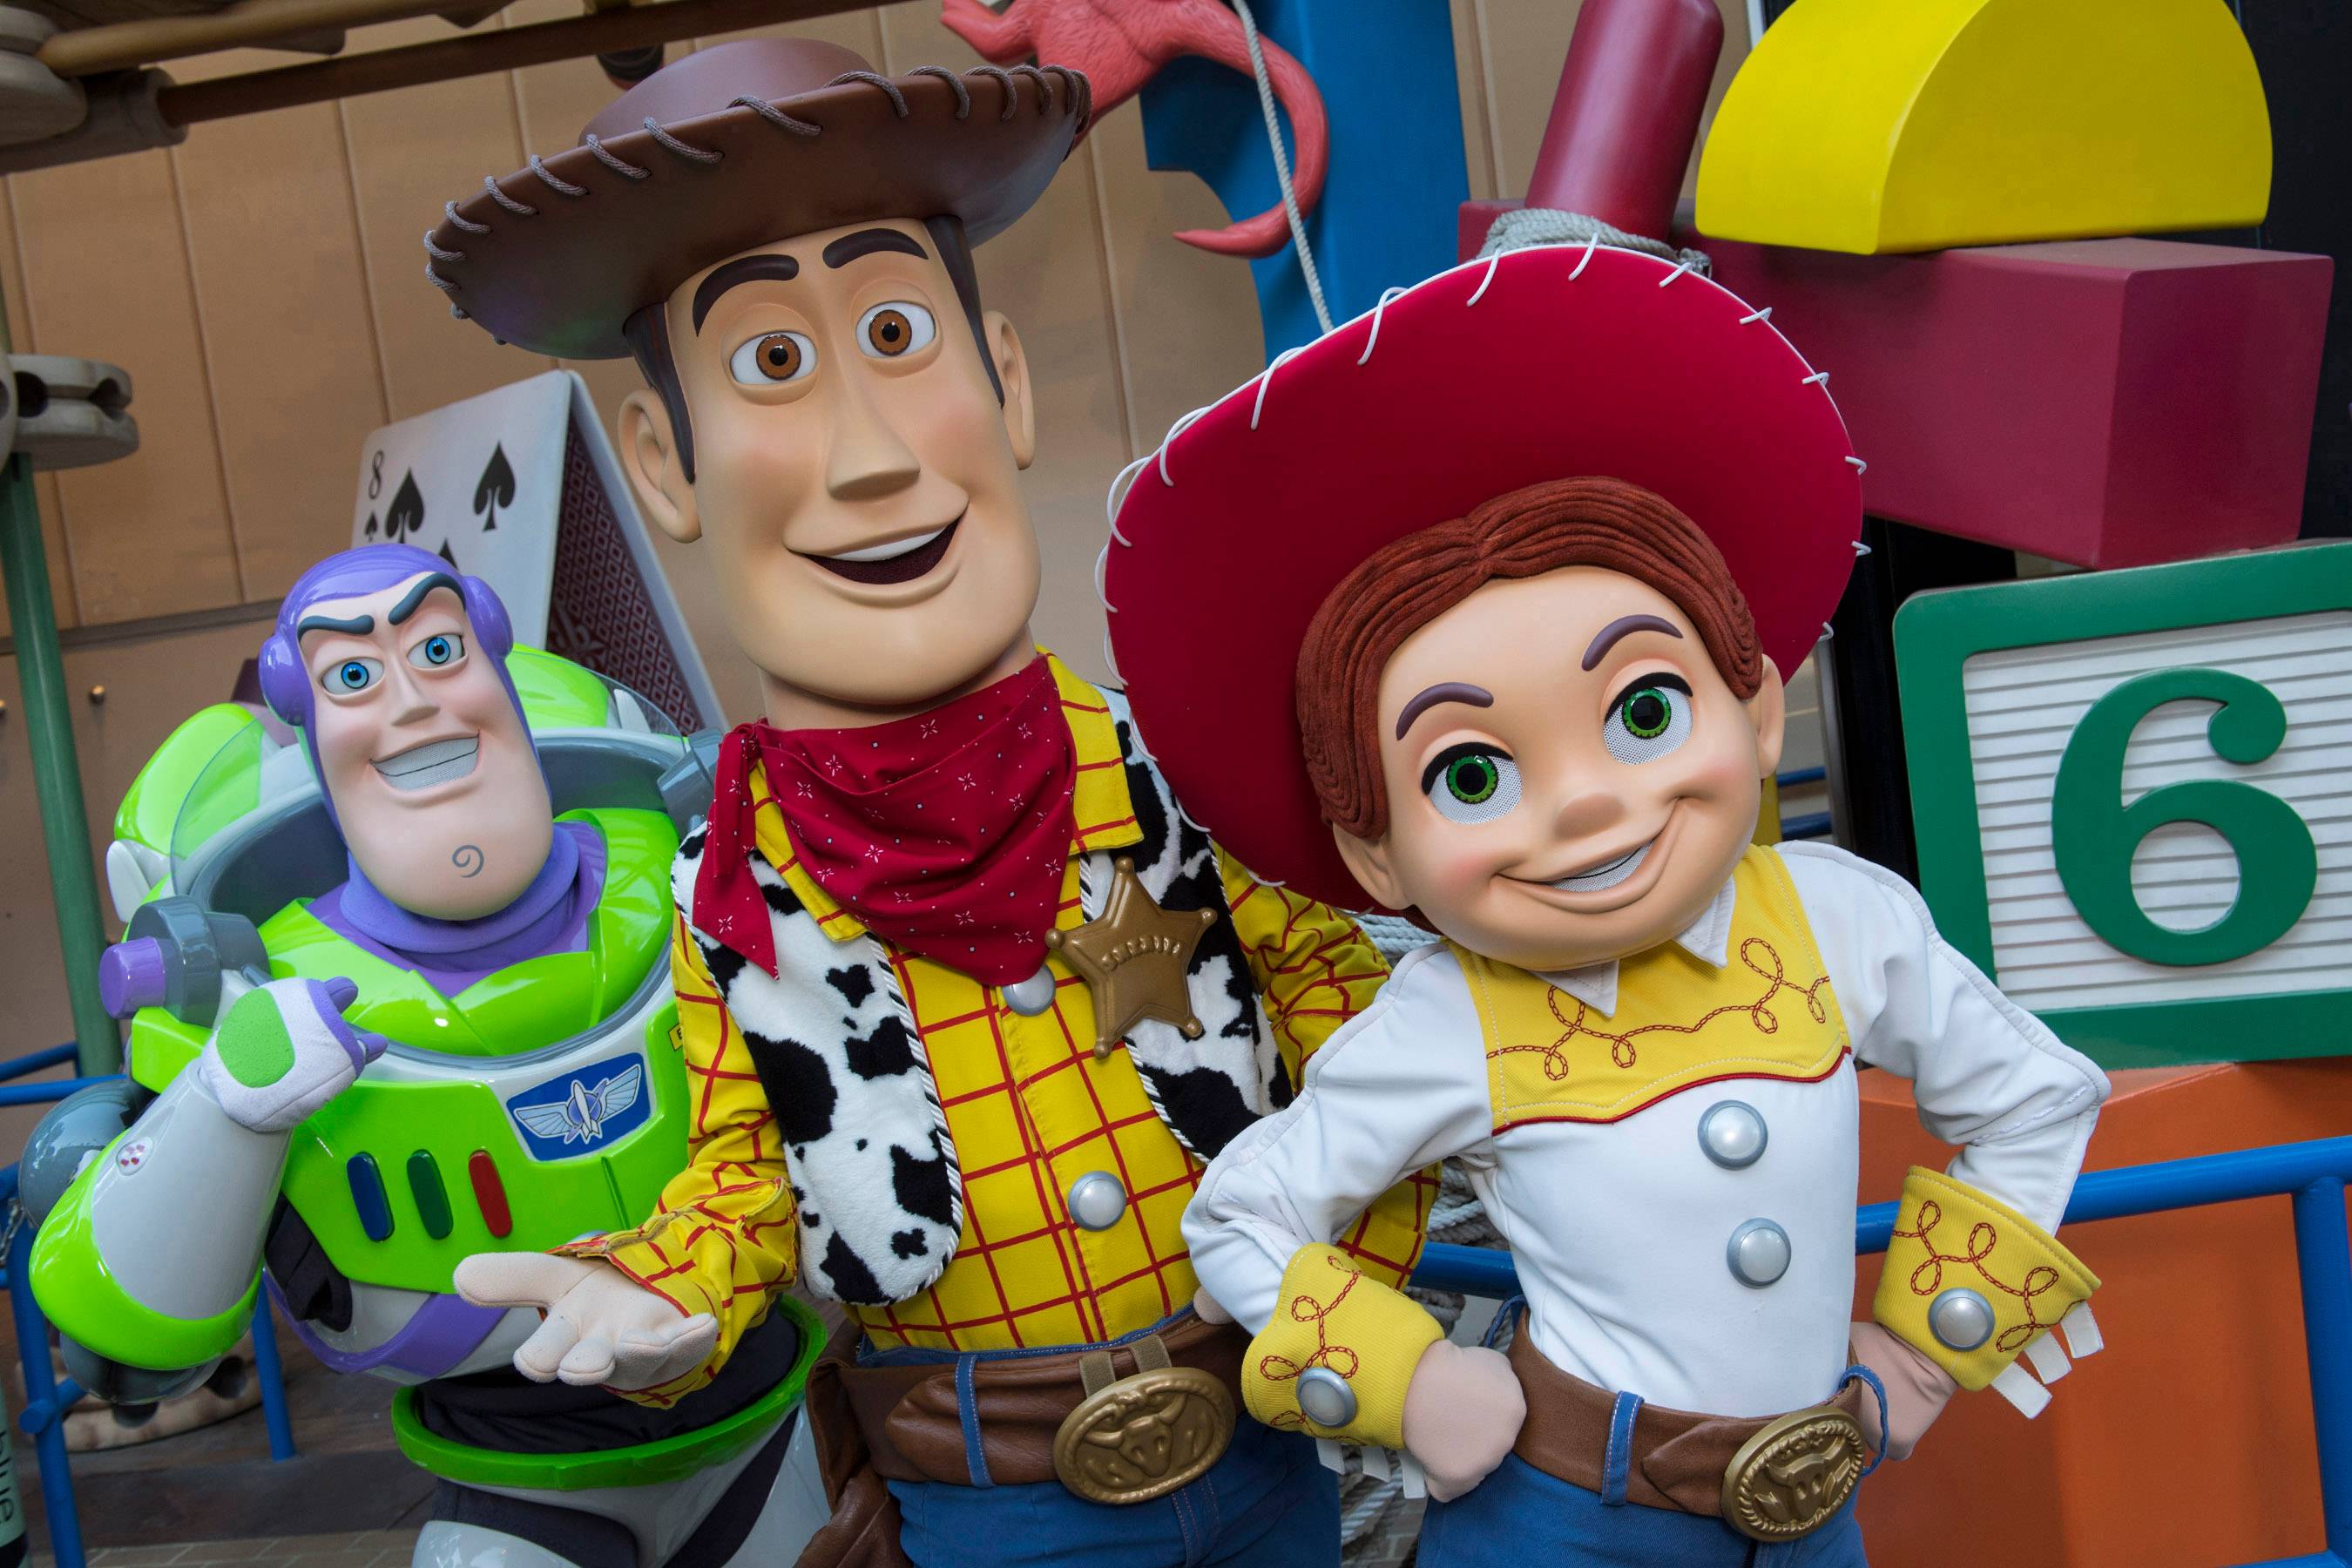 Toy Story Land to feature character meet and greets with Toy Story favorites